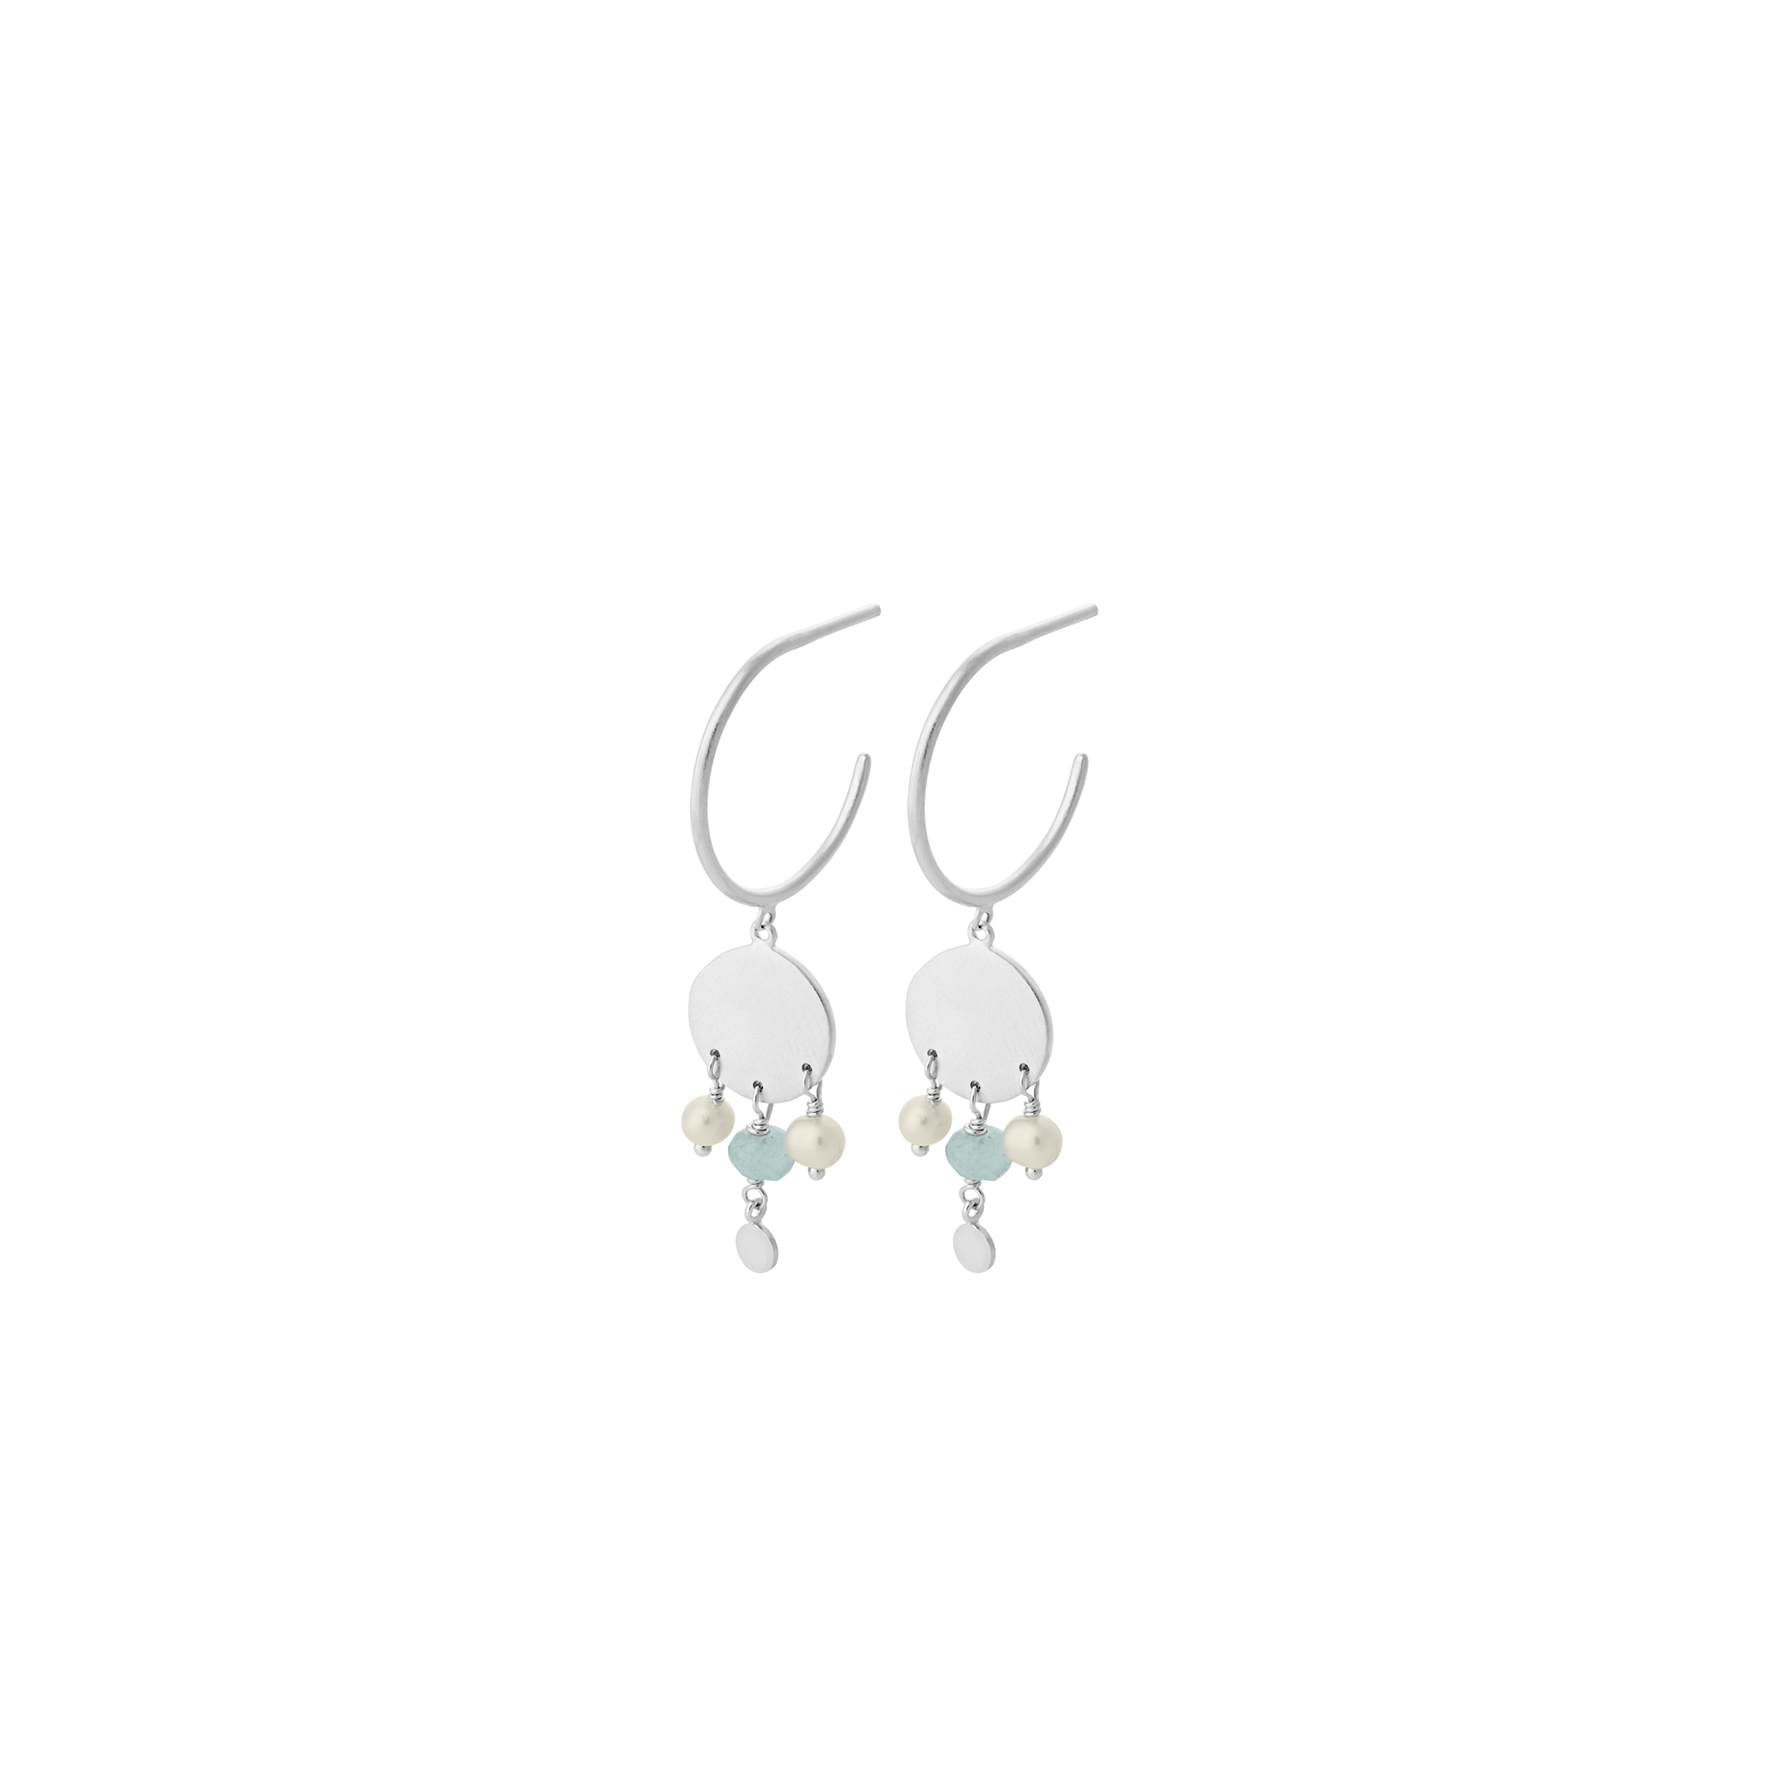 Dream Catcher Hoops from Pernille Corydon in Silver Sterling 925| Aqua Blue,Freshwater Pearl